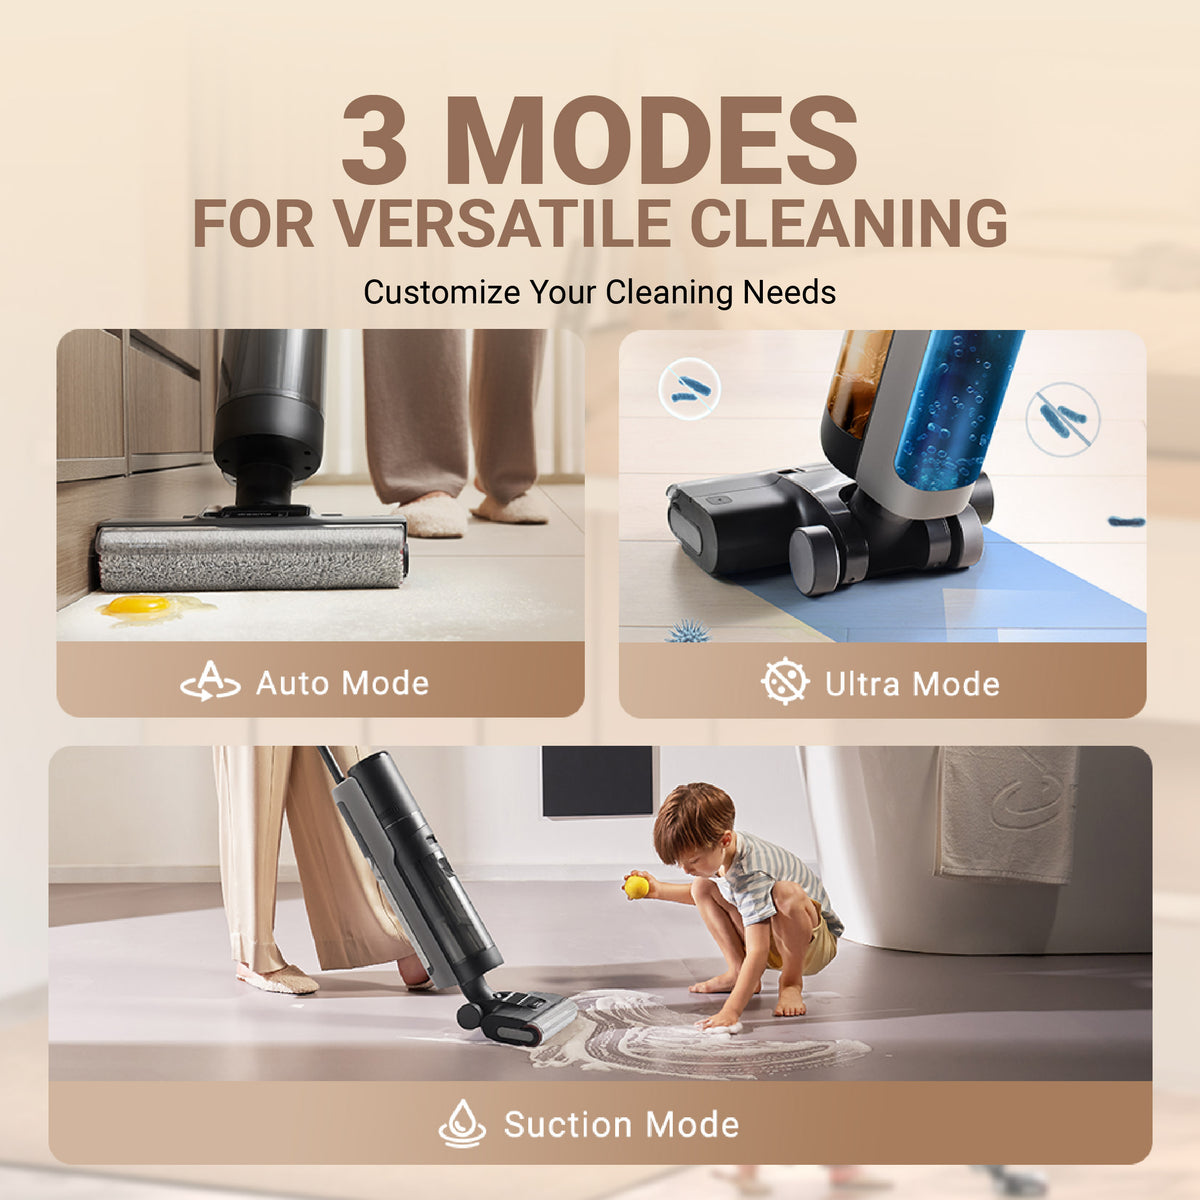 Dreame H12 Pro Cordless Wet and Dry Vacuum